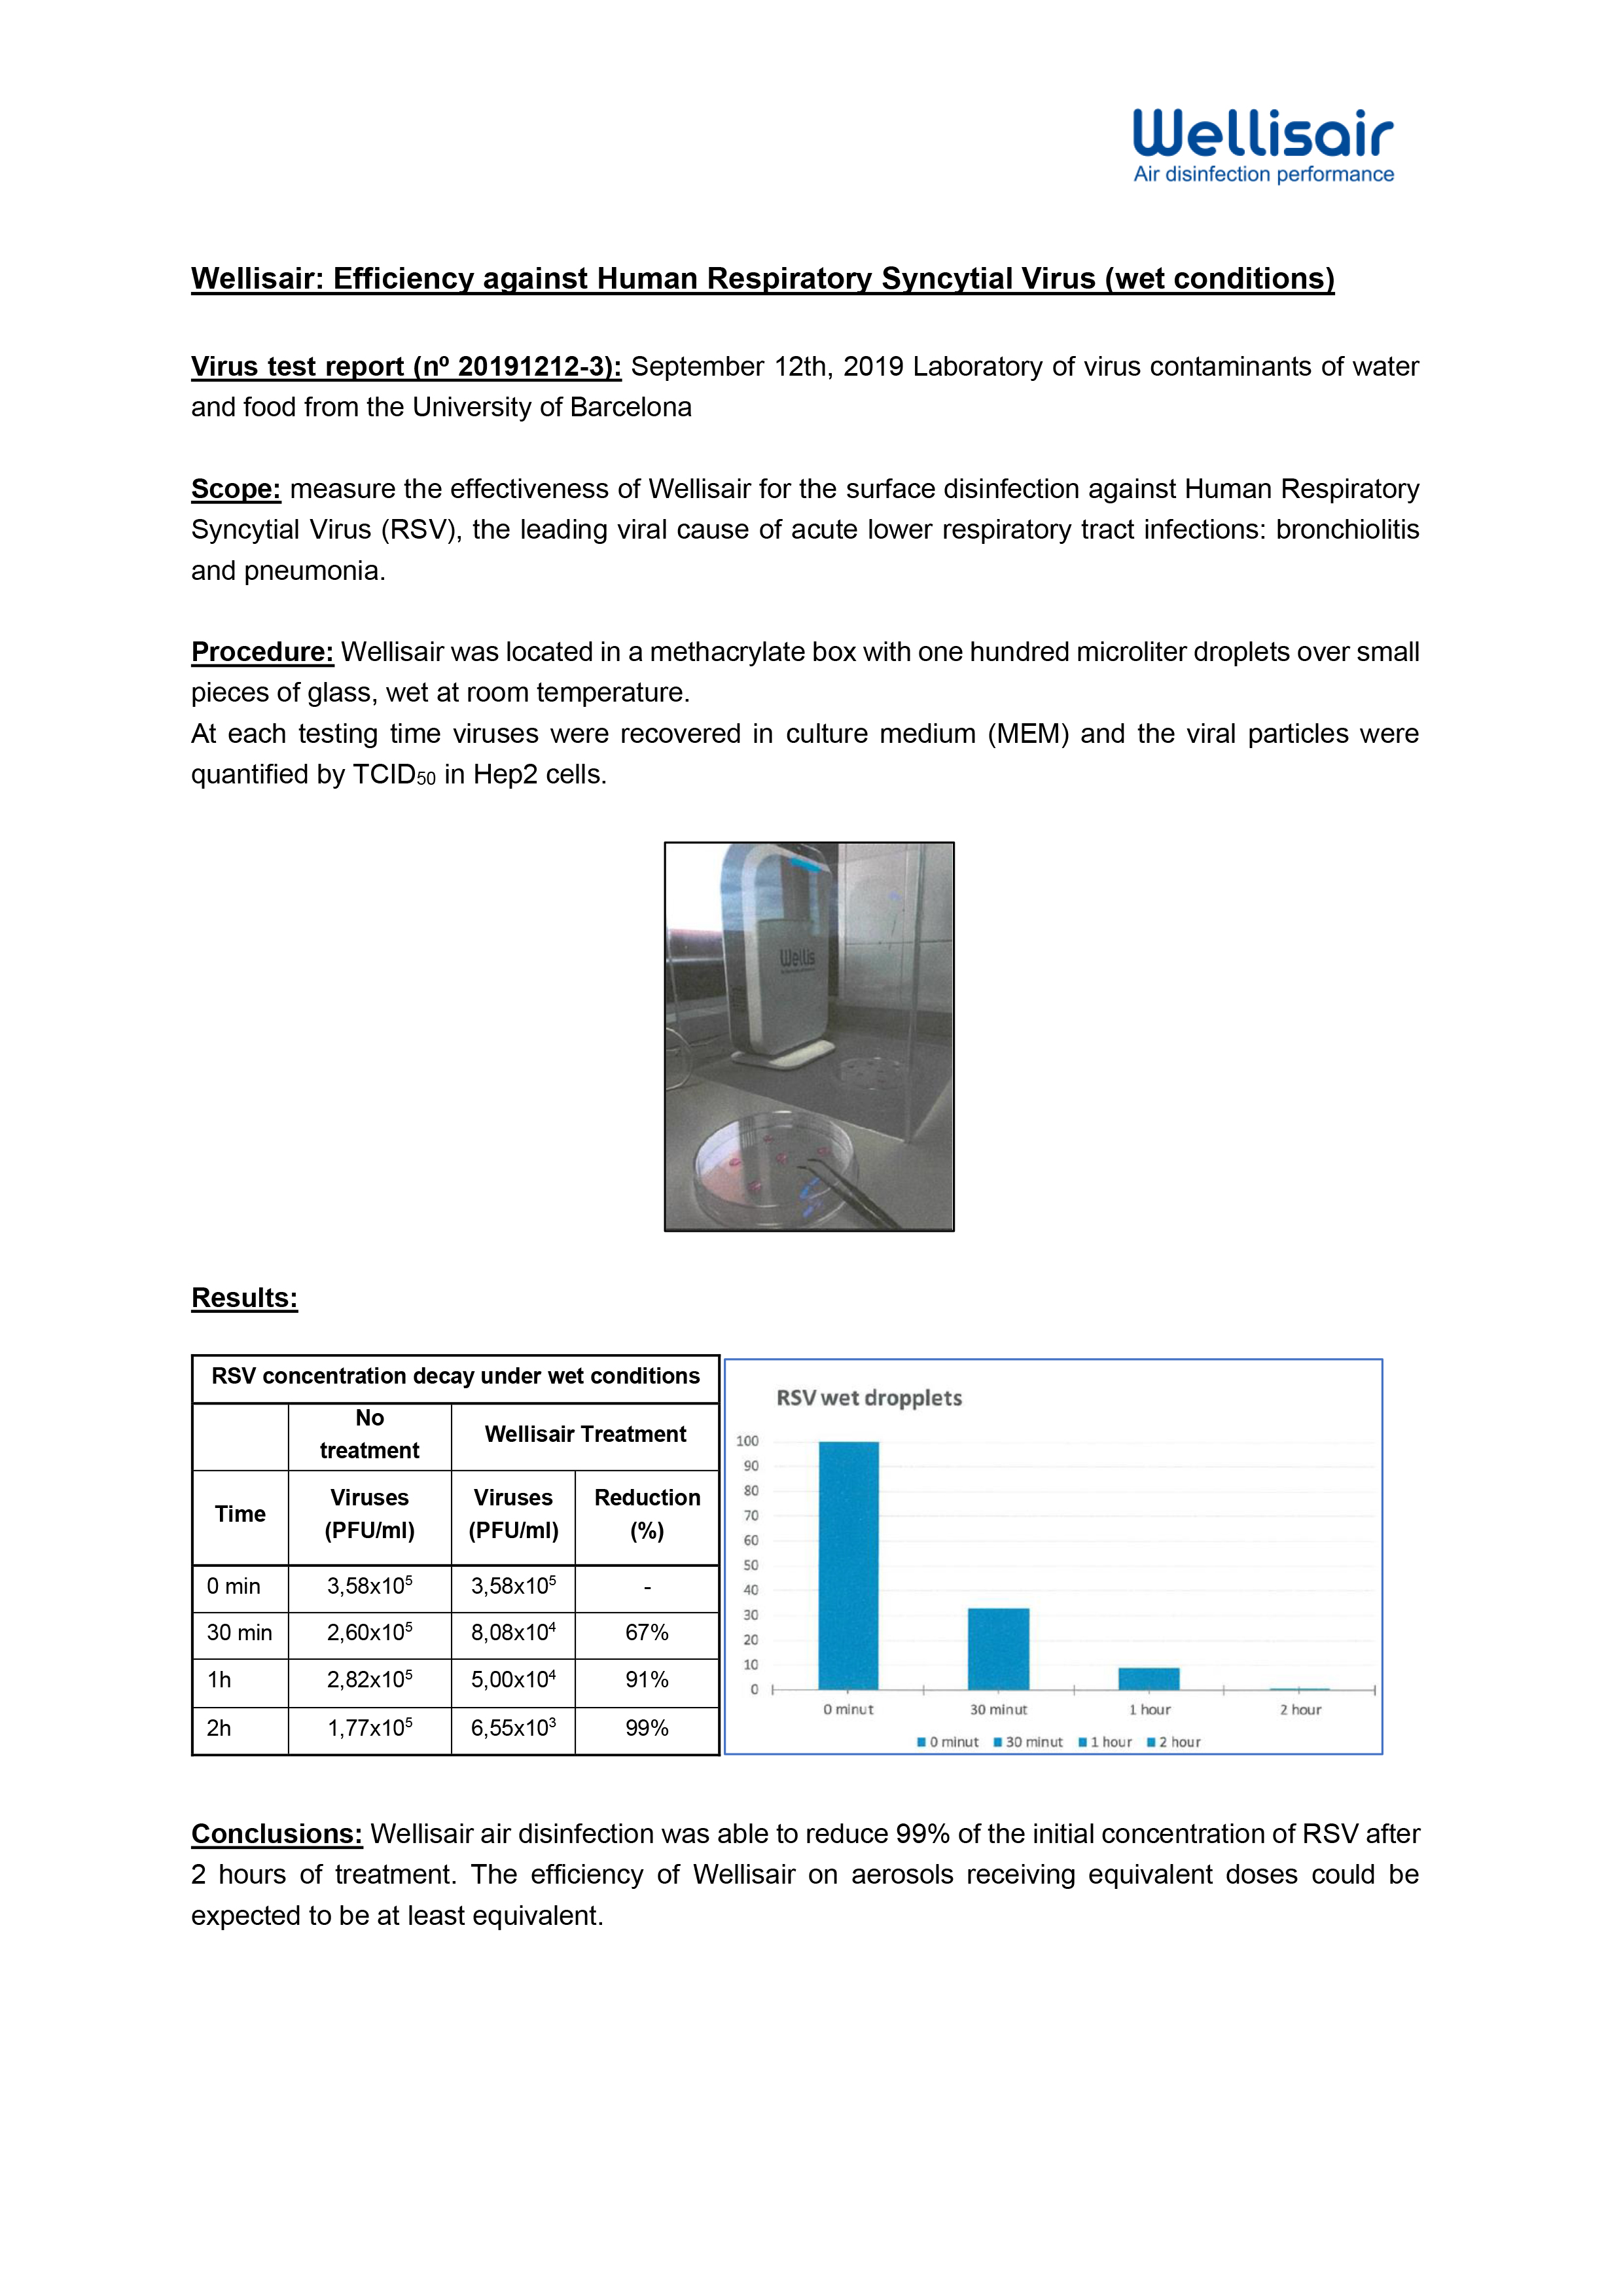 Efficiency against Human Respiratory Syncytial Virus (wet conditions) - Test result Laboratory of virus contaminants of water and food (University of Barcelona)